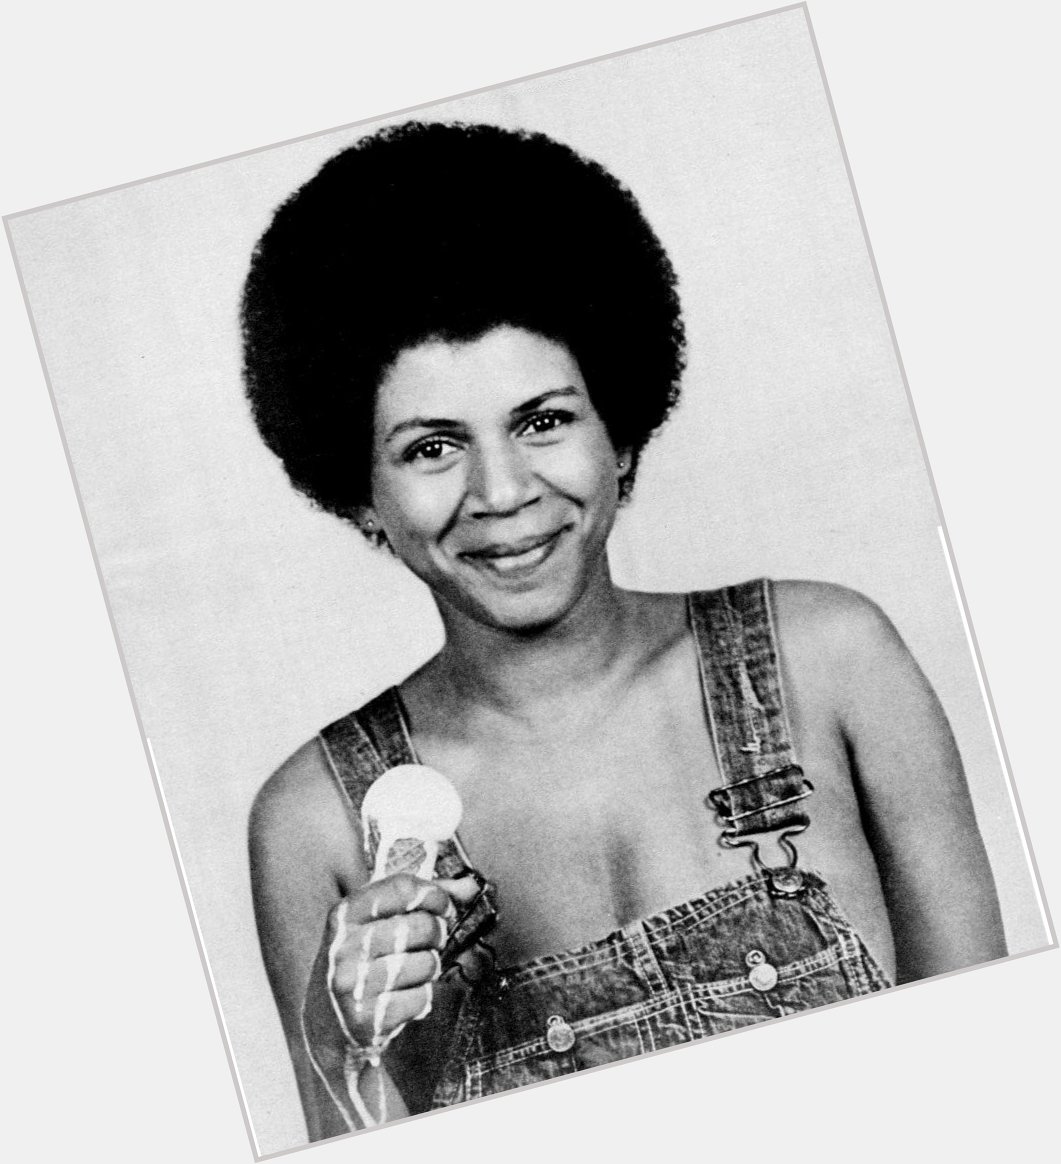 Happy Birthday Minnie Riperton!
The Walker Collective - A Law Firm For Creatives
 